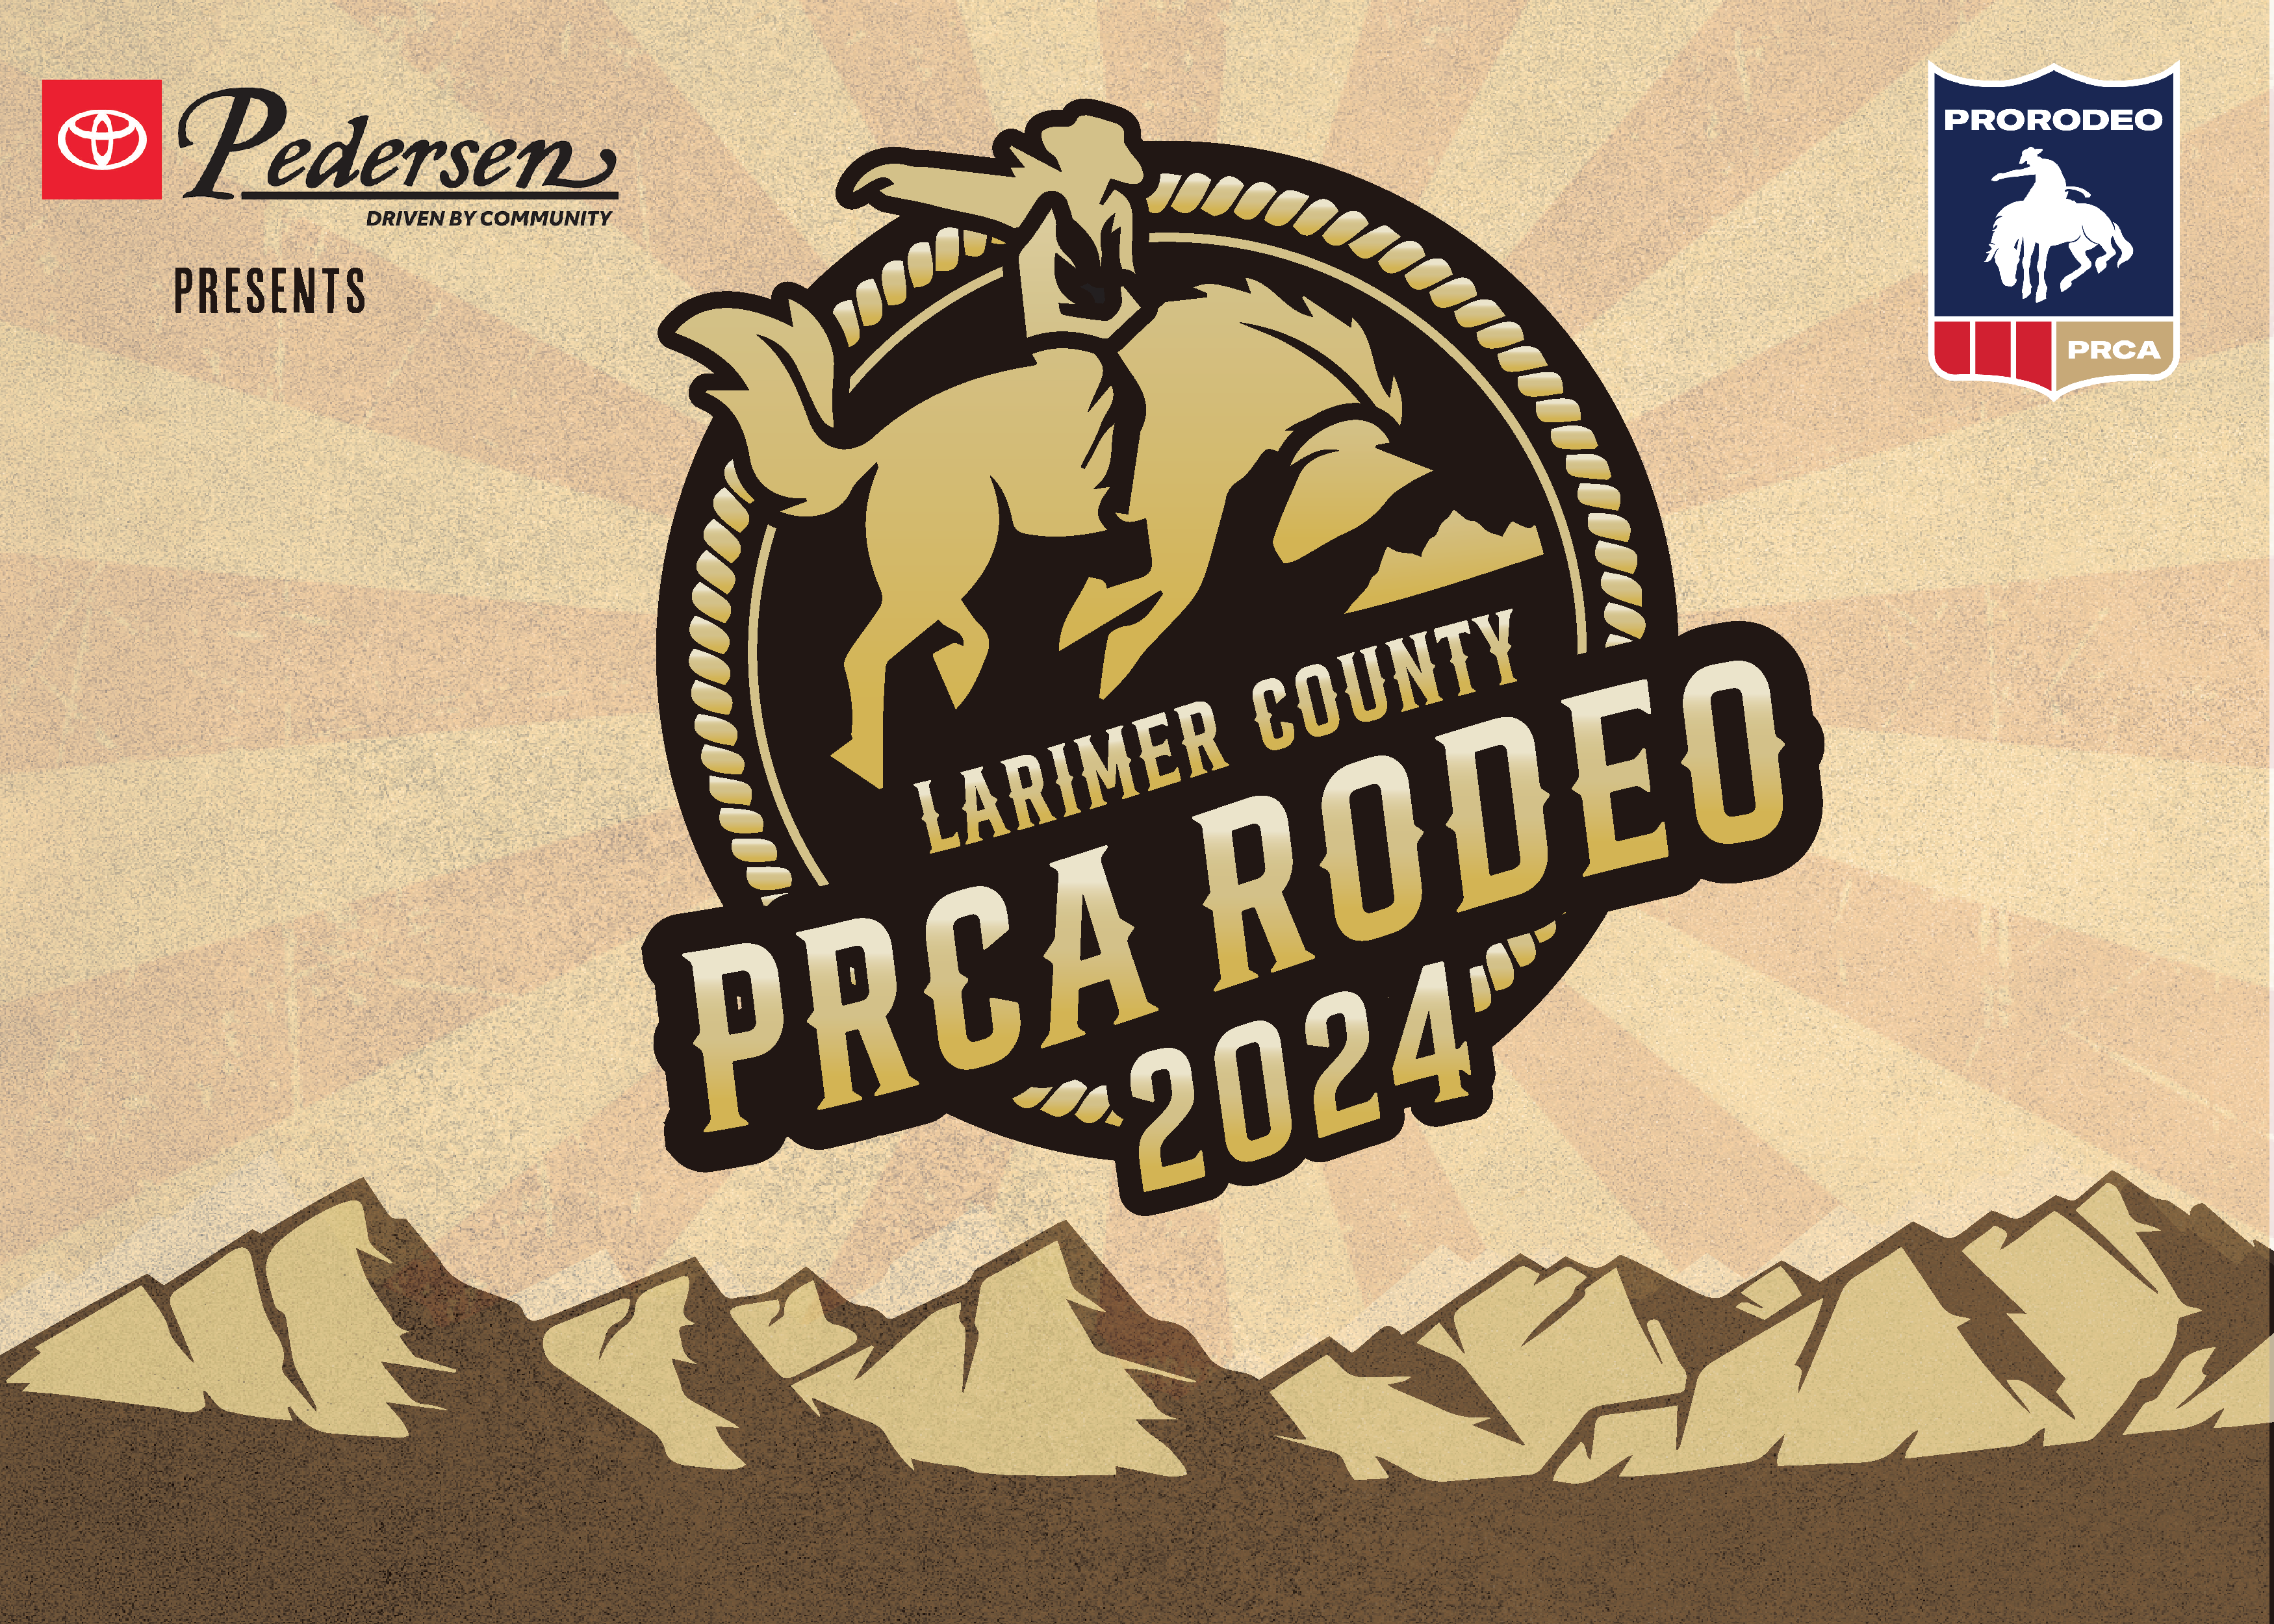 More Info for Pedersen Toyota's PRCA Rodeo 